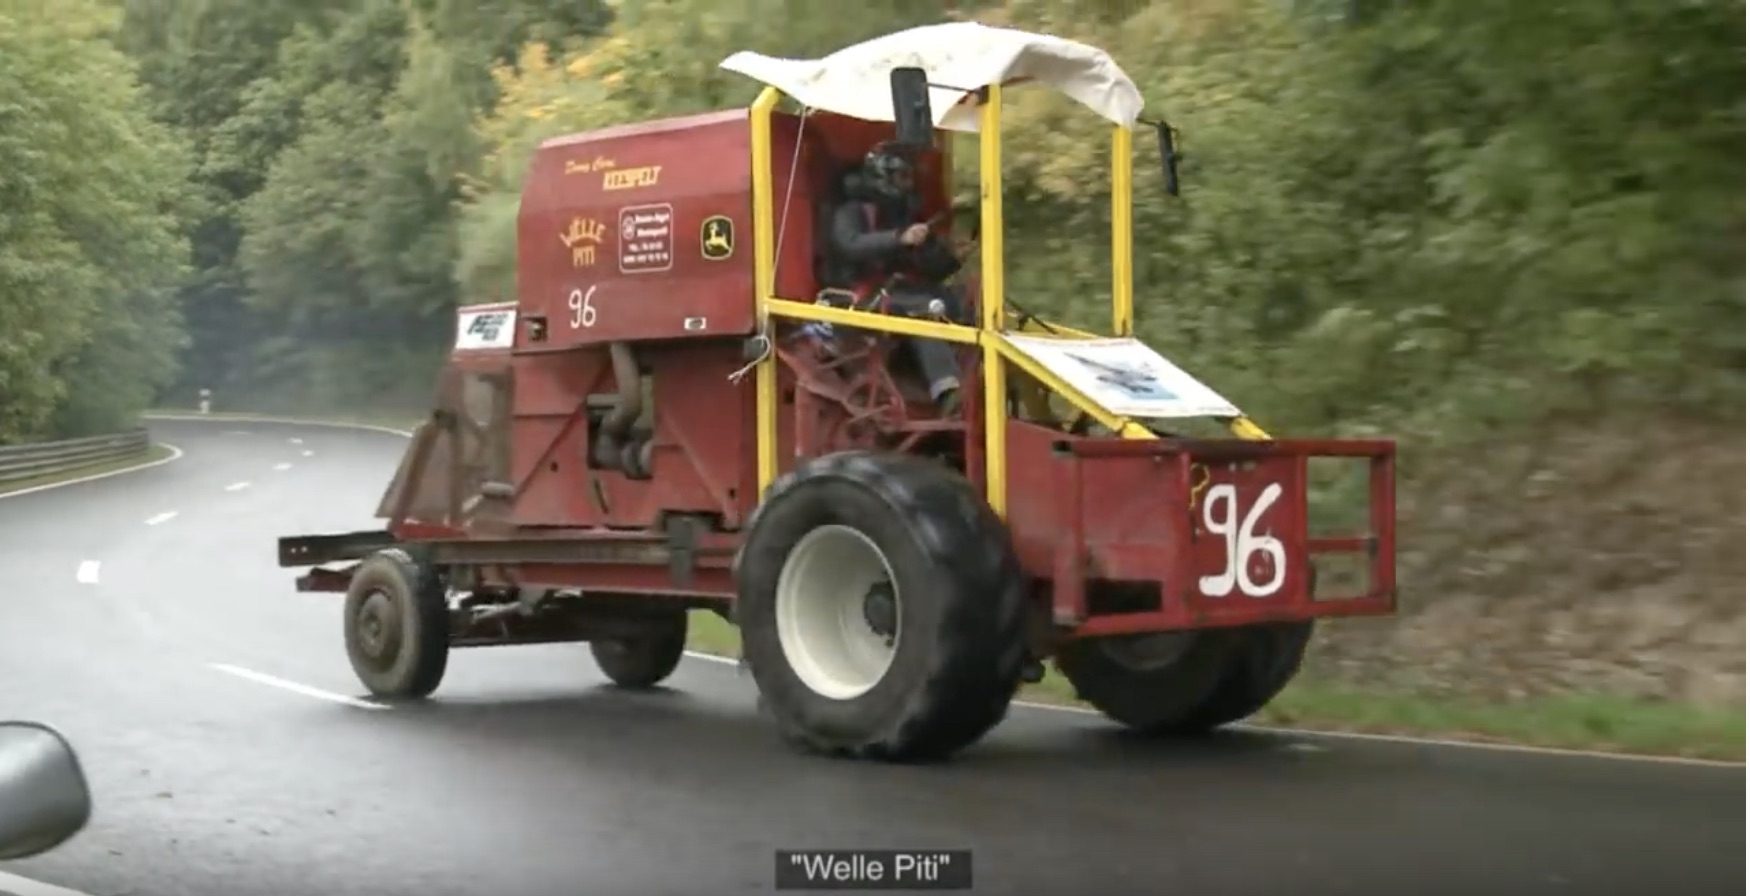 The “WTF?!” Files: Racing Combines Up The Côte de Holtz Hillclimb in Luxembourg